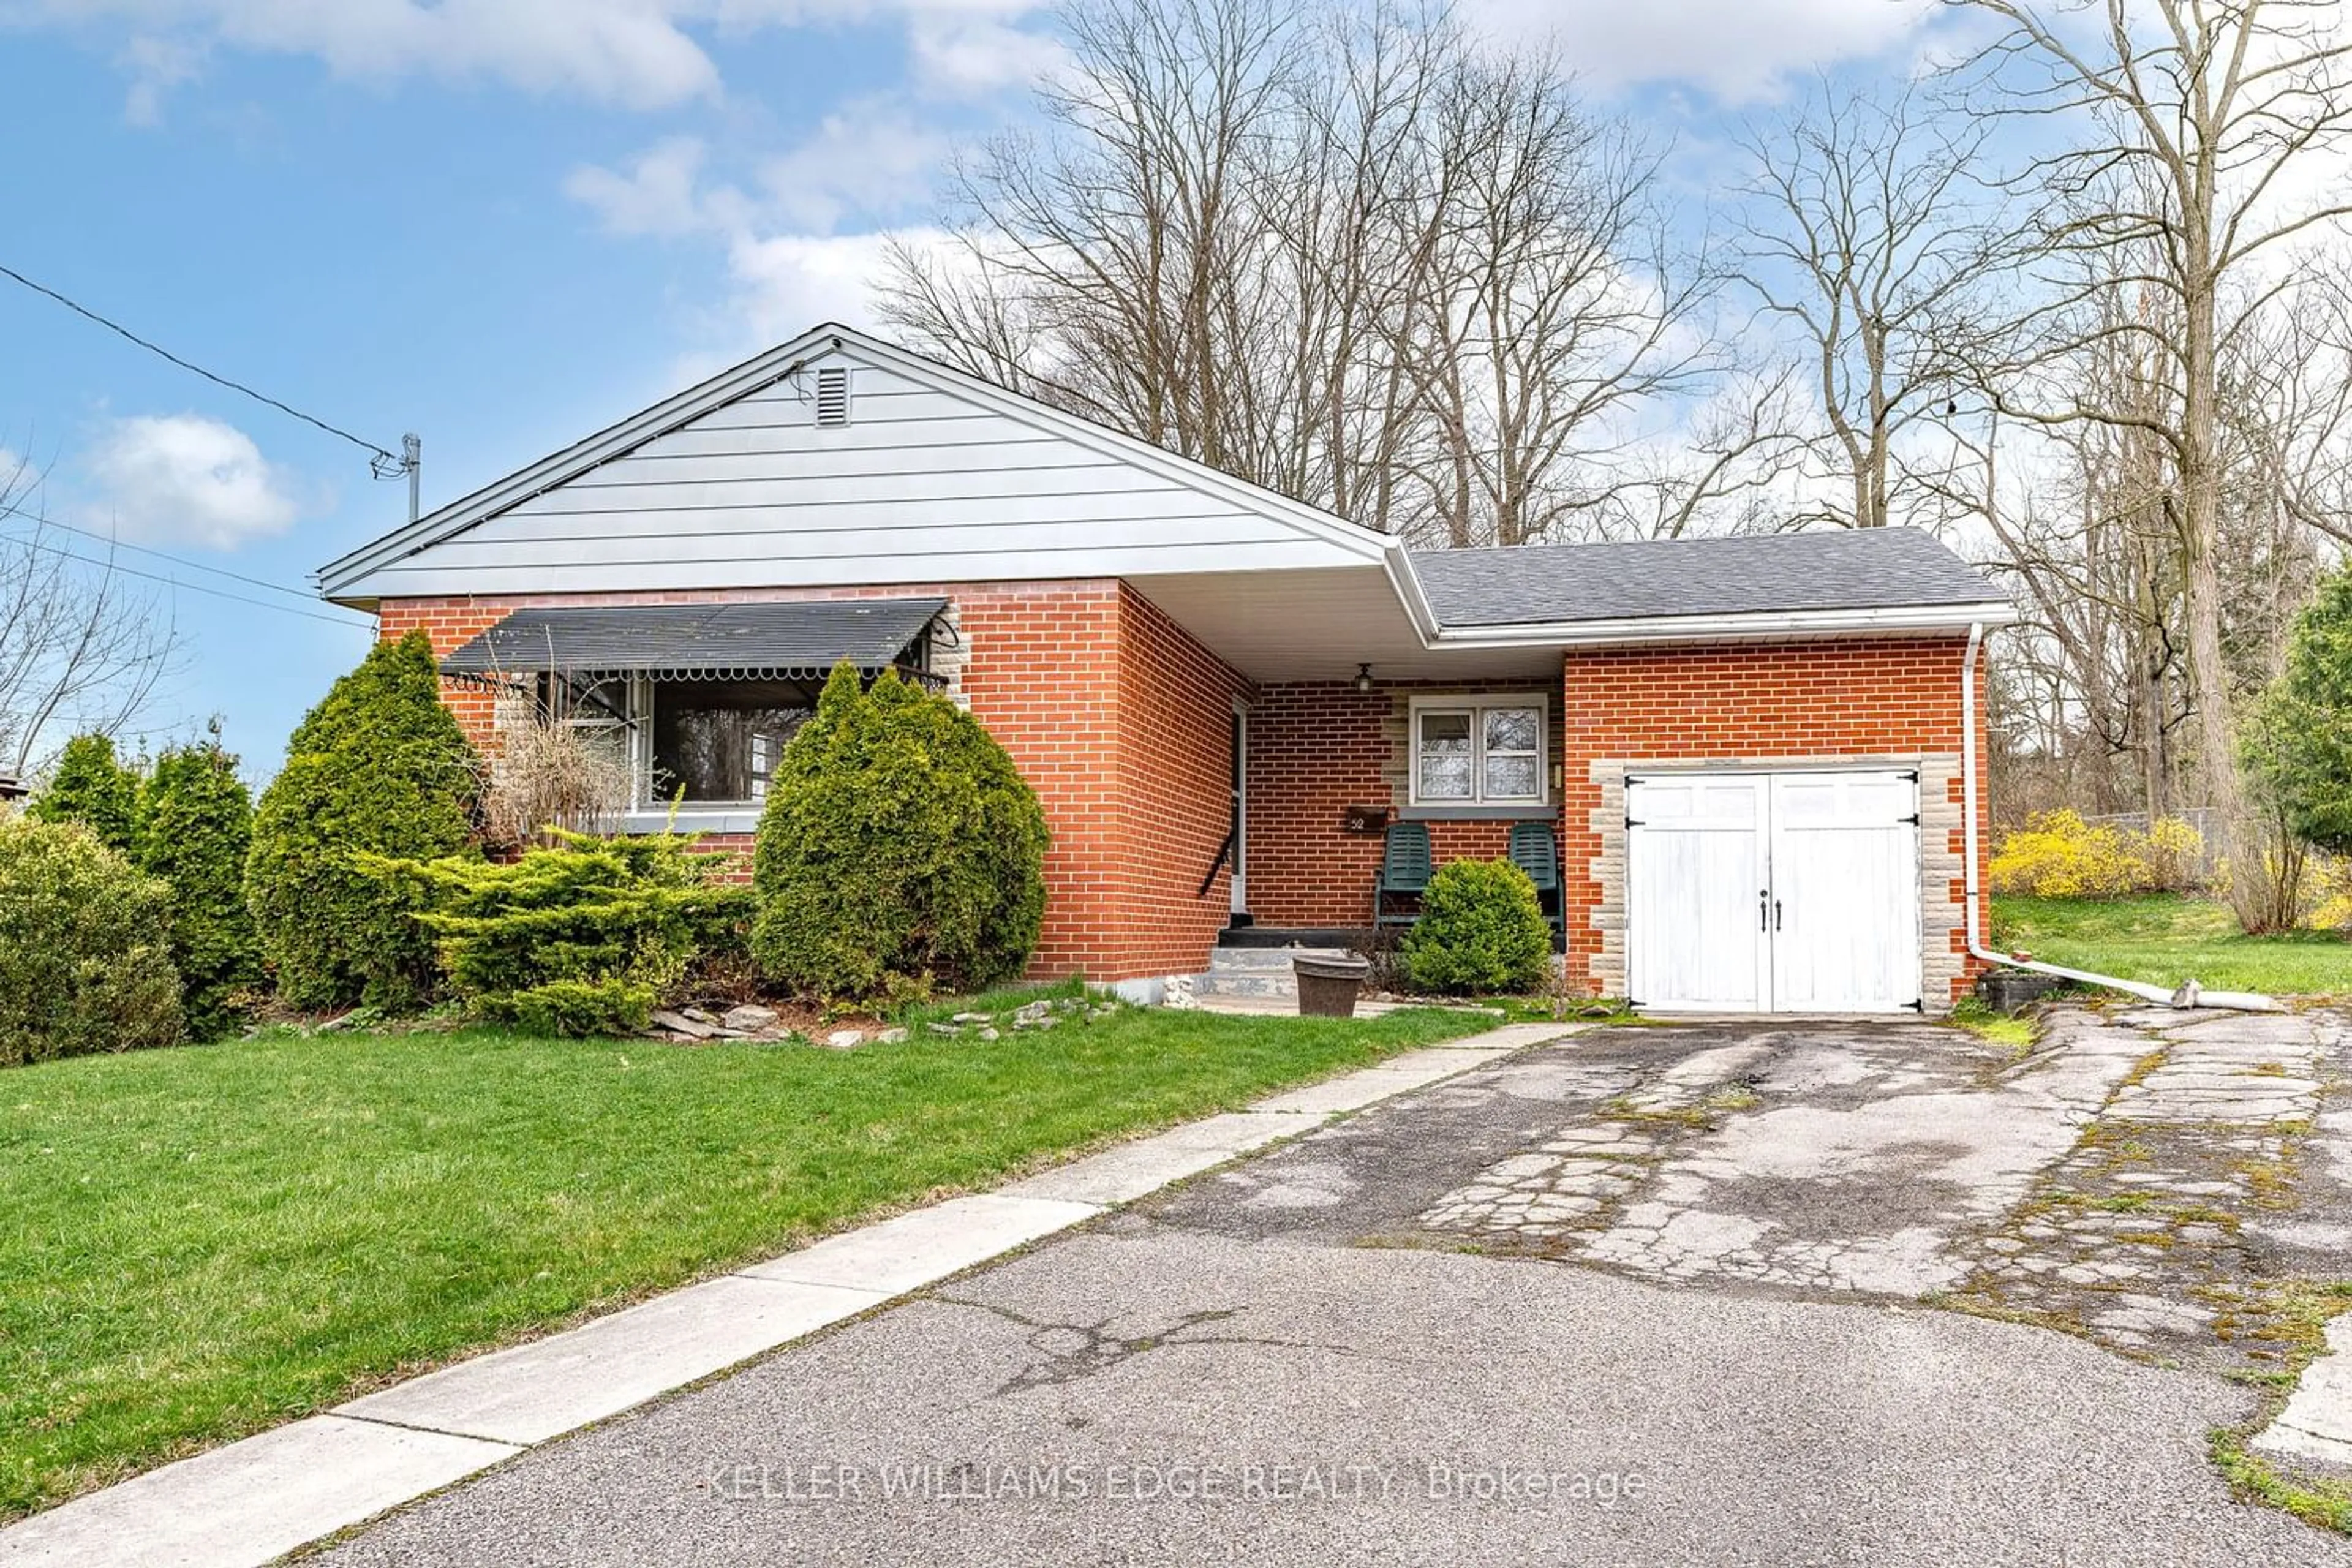 Home with brick exterior material for 52 Kemp Dr, Hamilton Ontario L9H 2M9